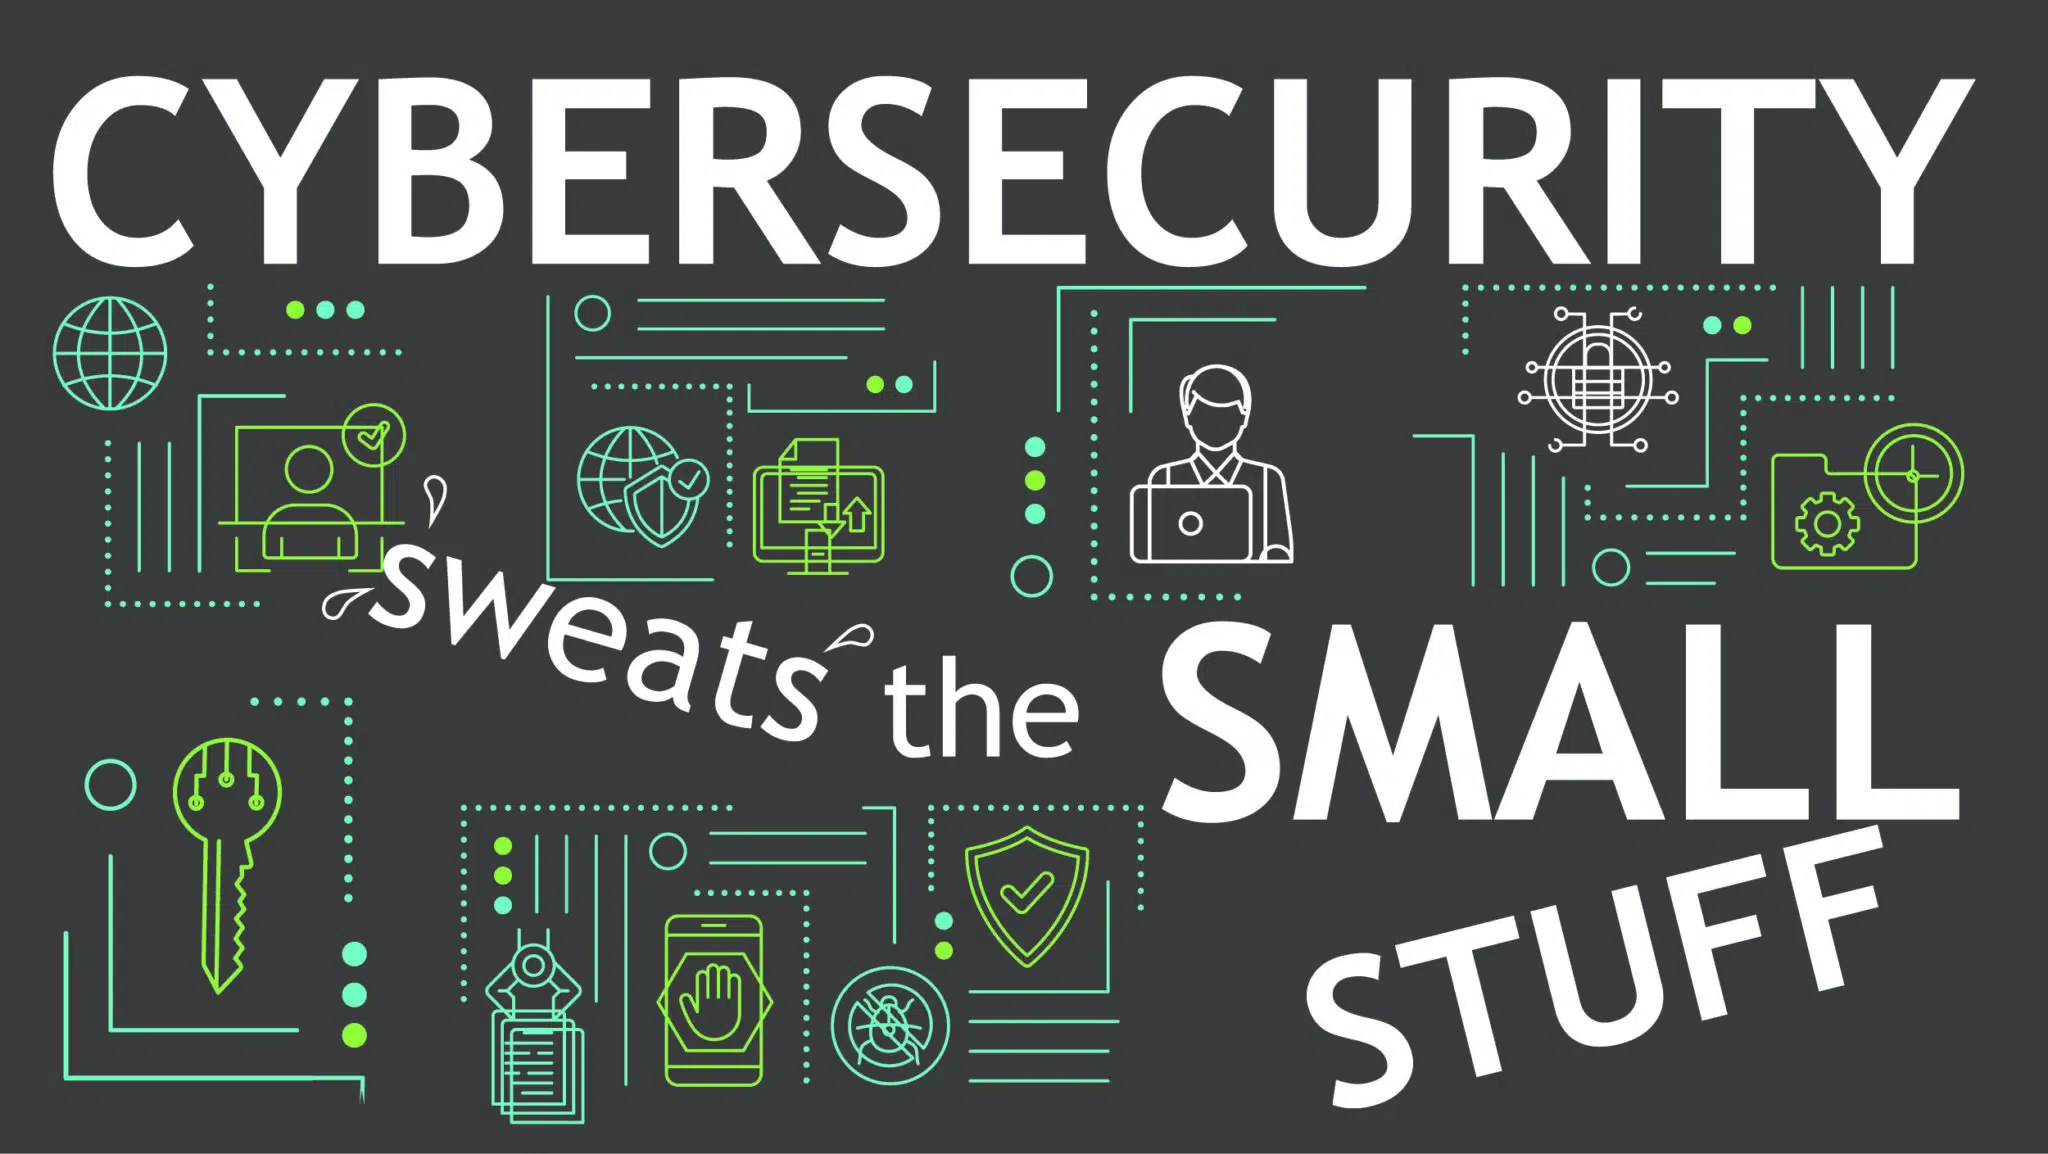 When it Comes to Cybersecurity, You DO Have to Sweat the Small Stuff